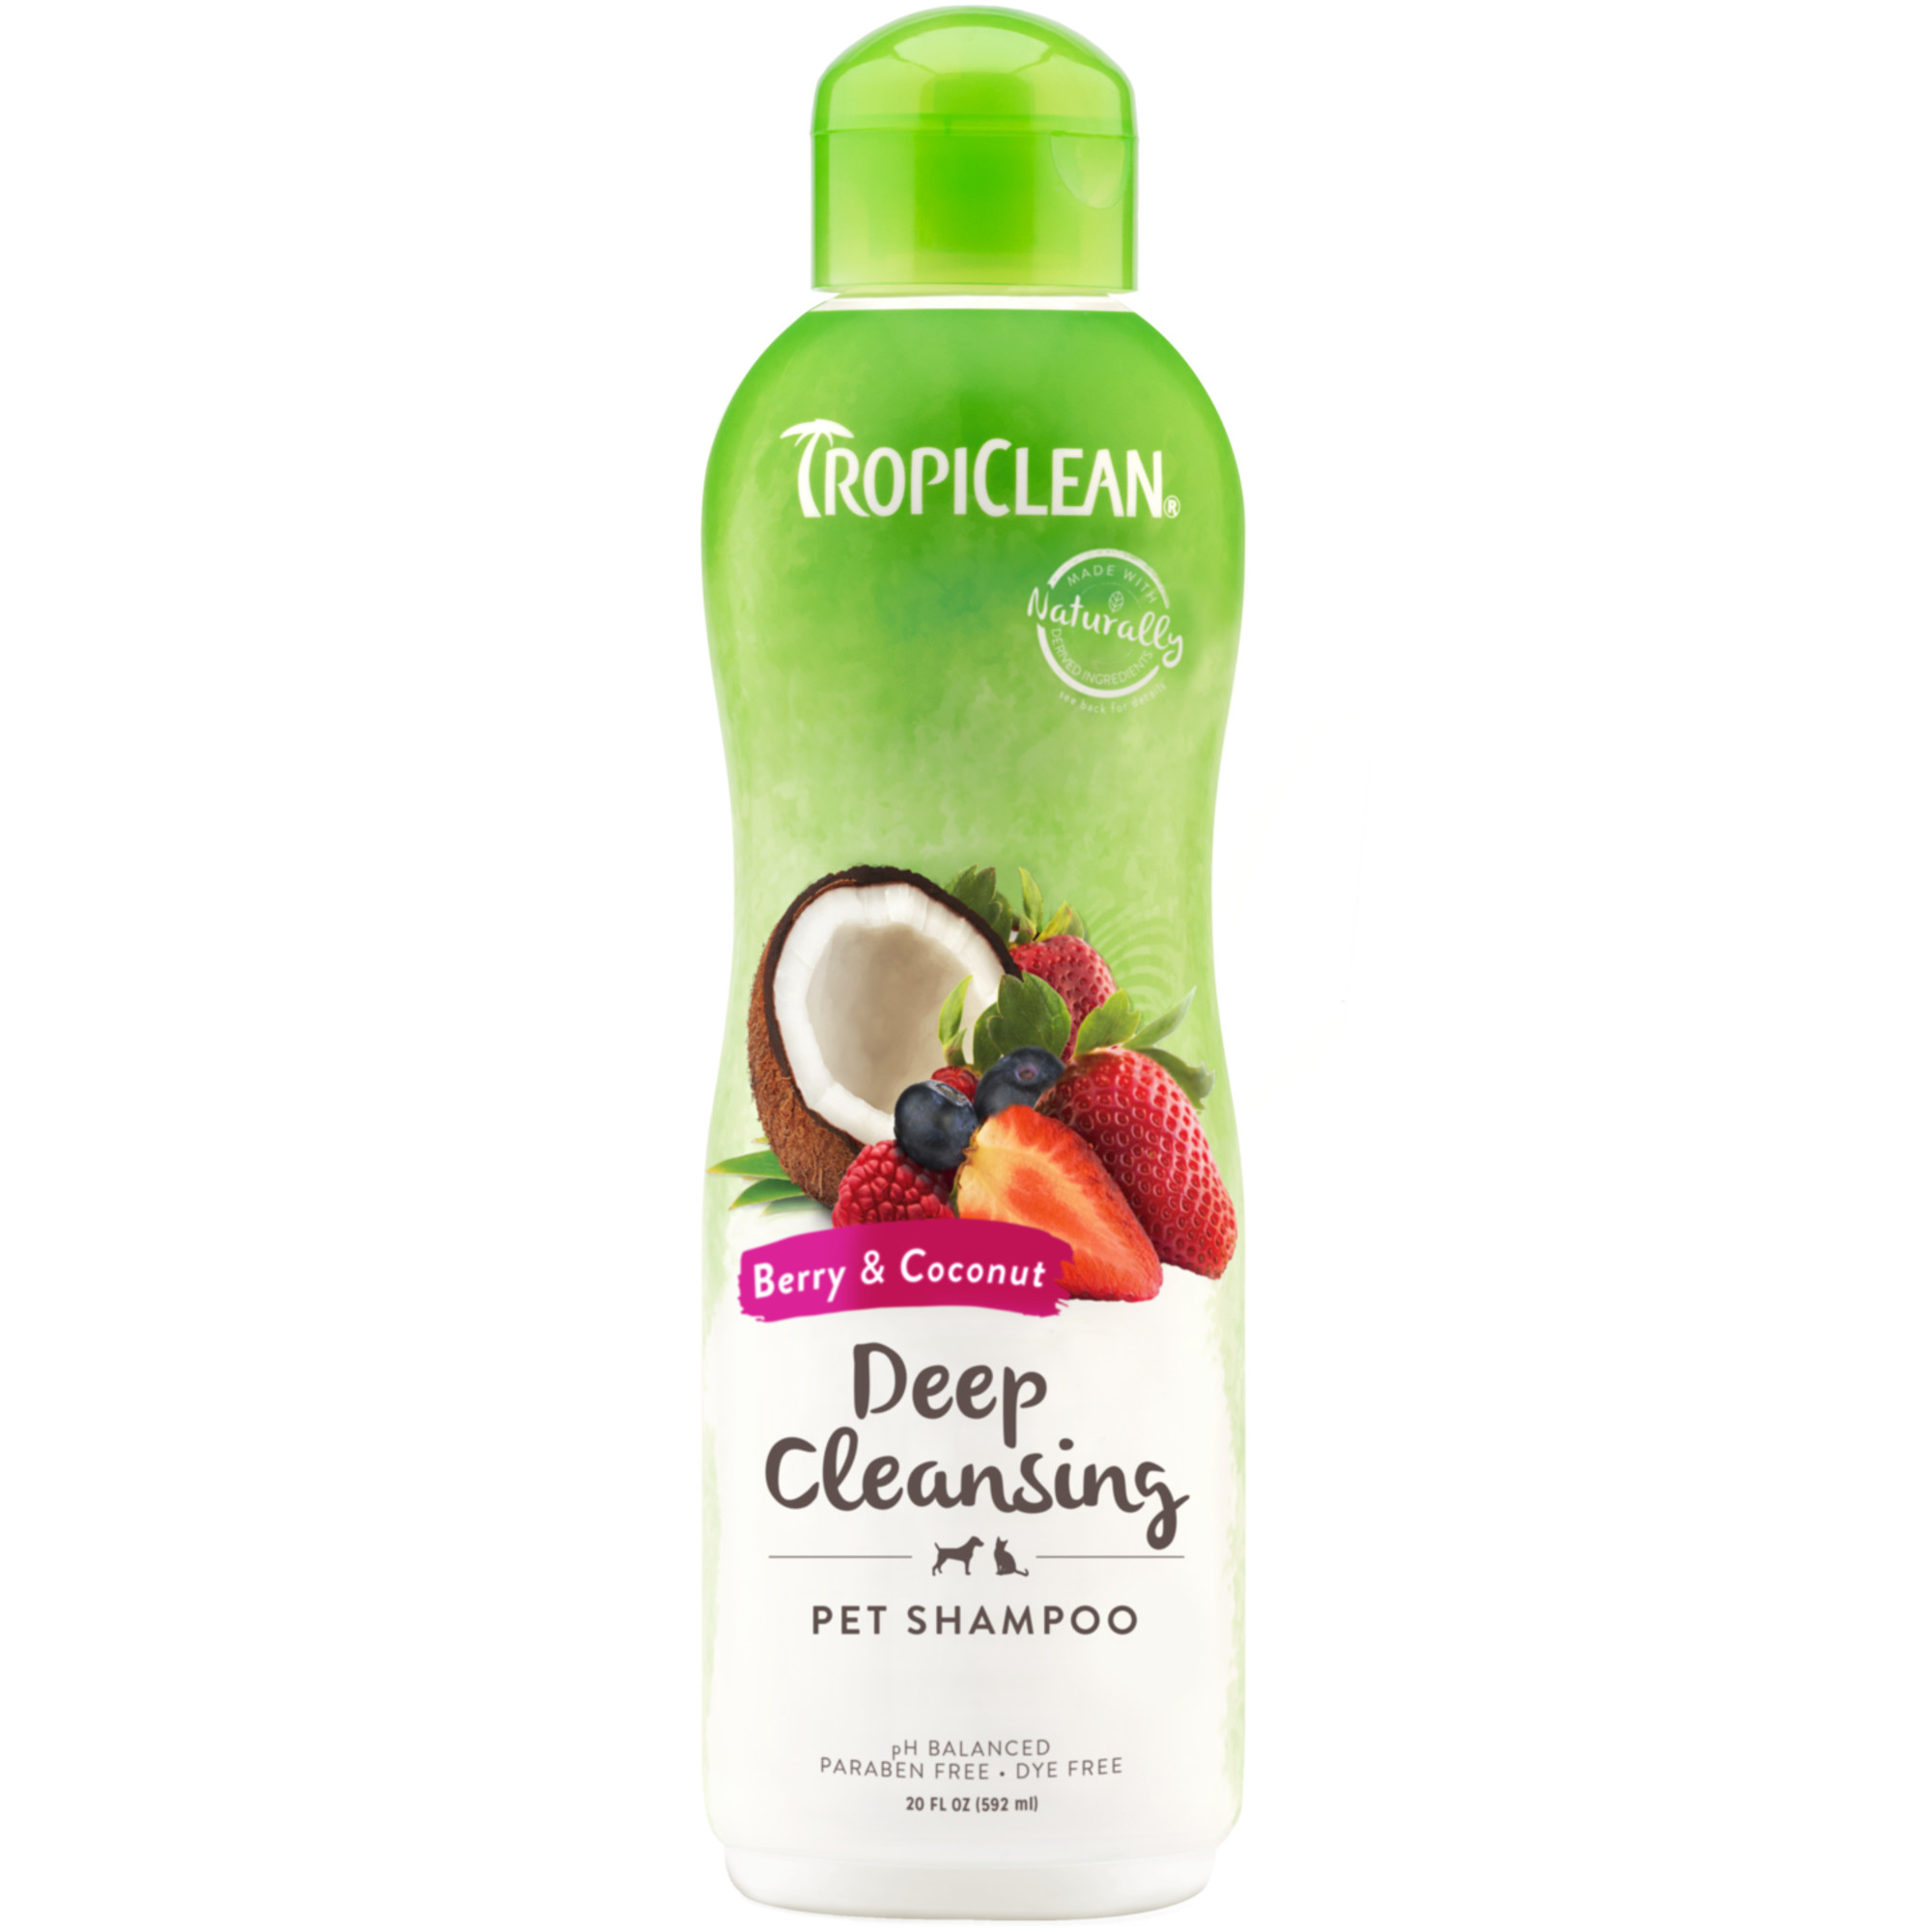 Berry & Coconut Deep Cleansing Shampoo for Pets